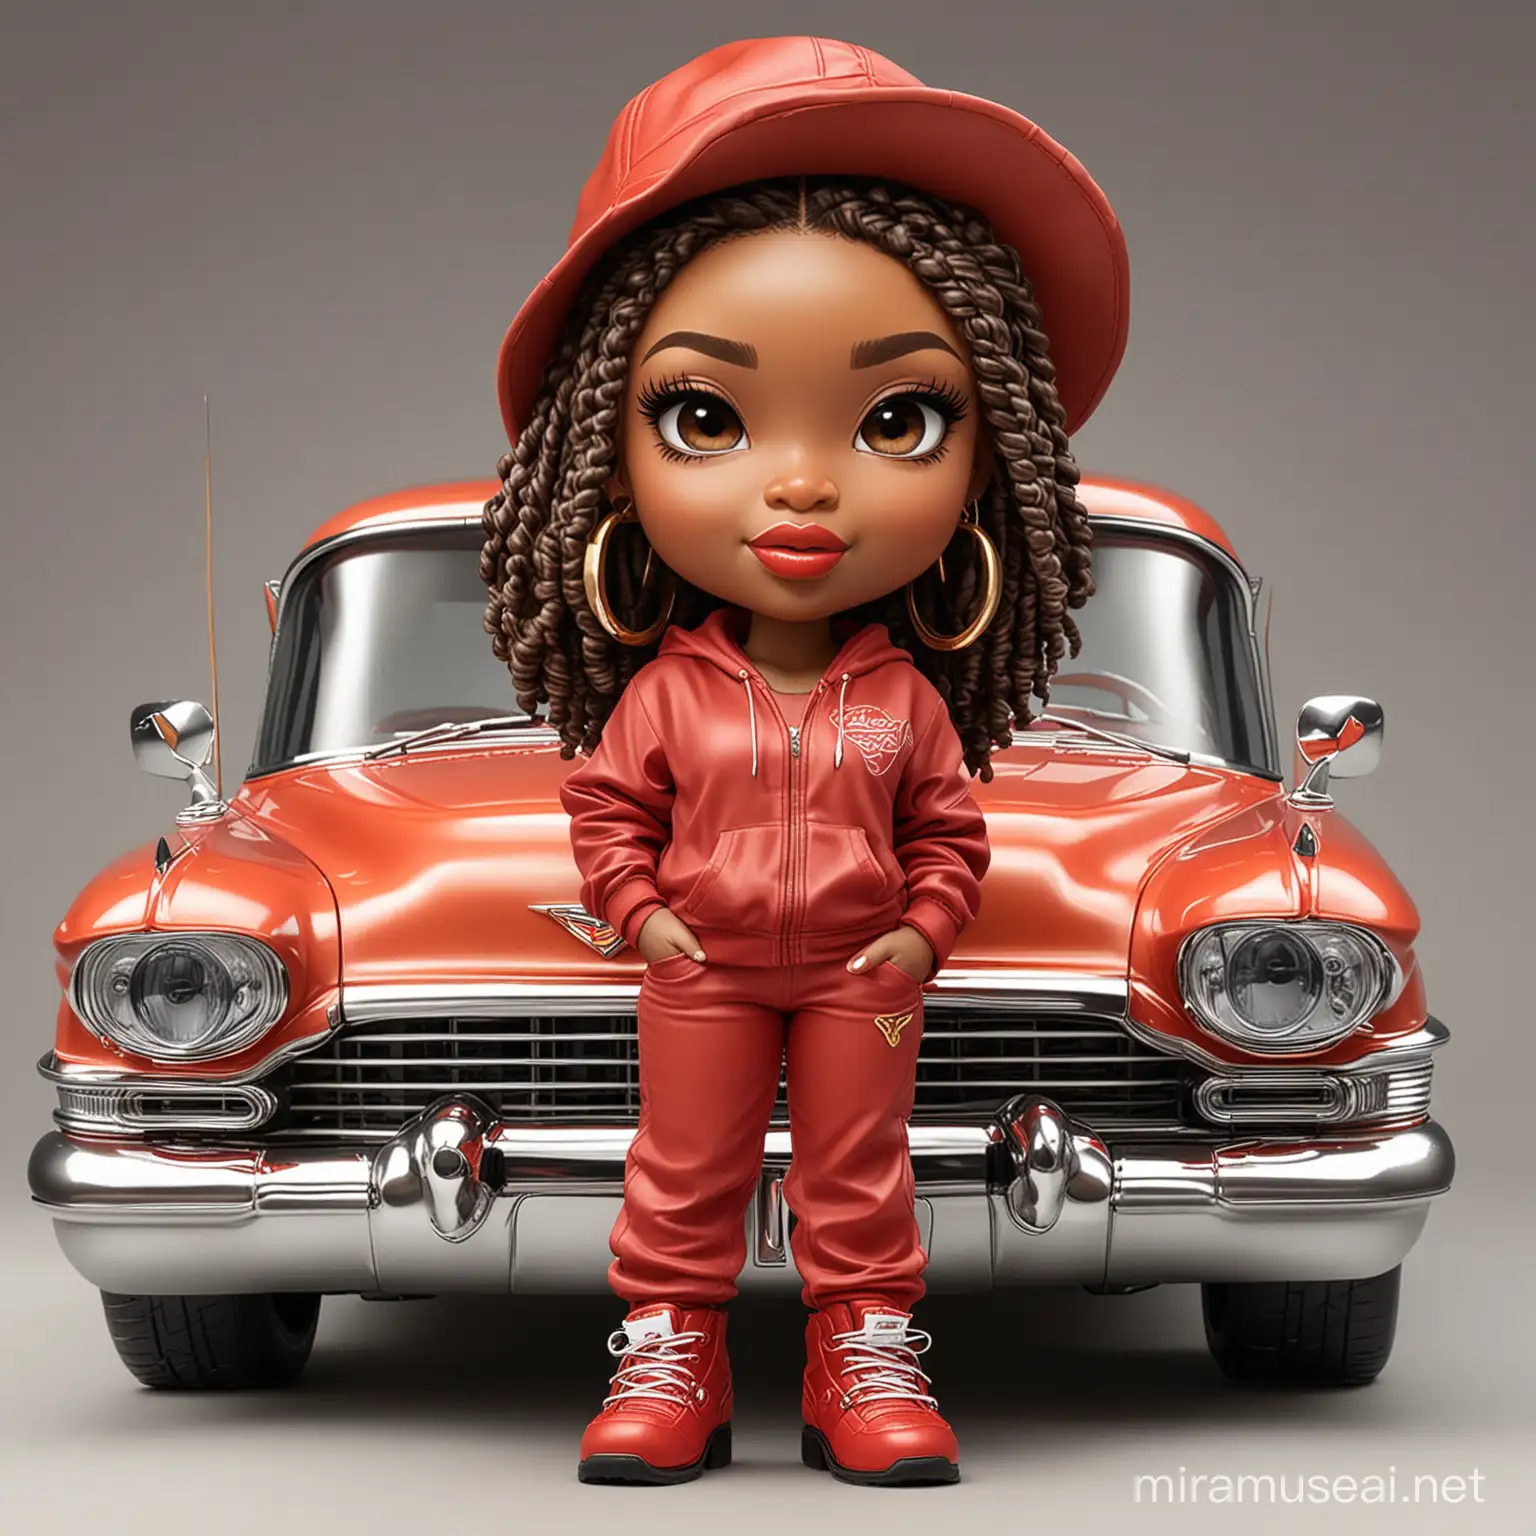 Digital airbrush illustration
of a 30-year-old flawless
melanin,chibi, standing and
holding a cellphone,
leaning on the hood of a
red 1952 Cadillac  with custom gold
and chrome 23 inch
Forgiato rims. She has a
curvy figure with a tiny
waist. Her
large almond-shaped eyes
and full lips are
emphasized. She's wearing
a red jogging suit and a
bucket hat, her feet in tan-
colored Timbaland-style
boots. Her hair is styled in
Marley Twists., in a vibrant
cartoon art style that
captures chibi proportions,
against a white background.
Aspect ratio: 12x12